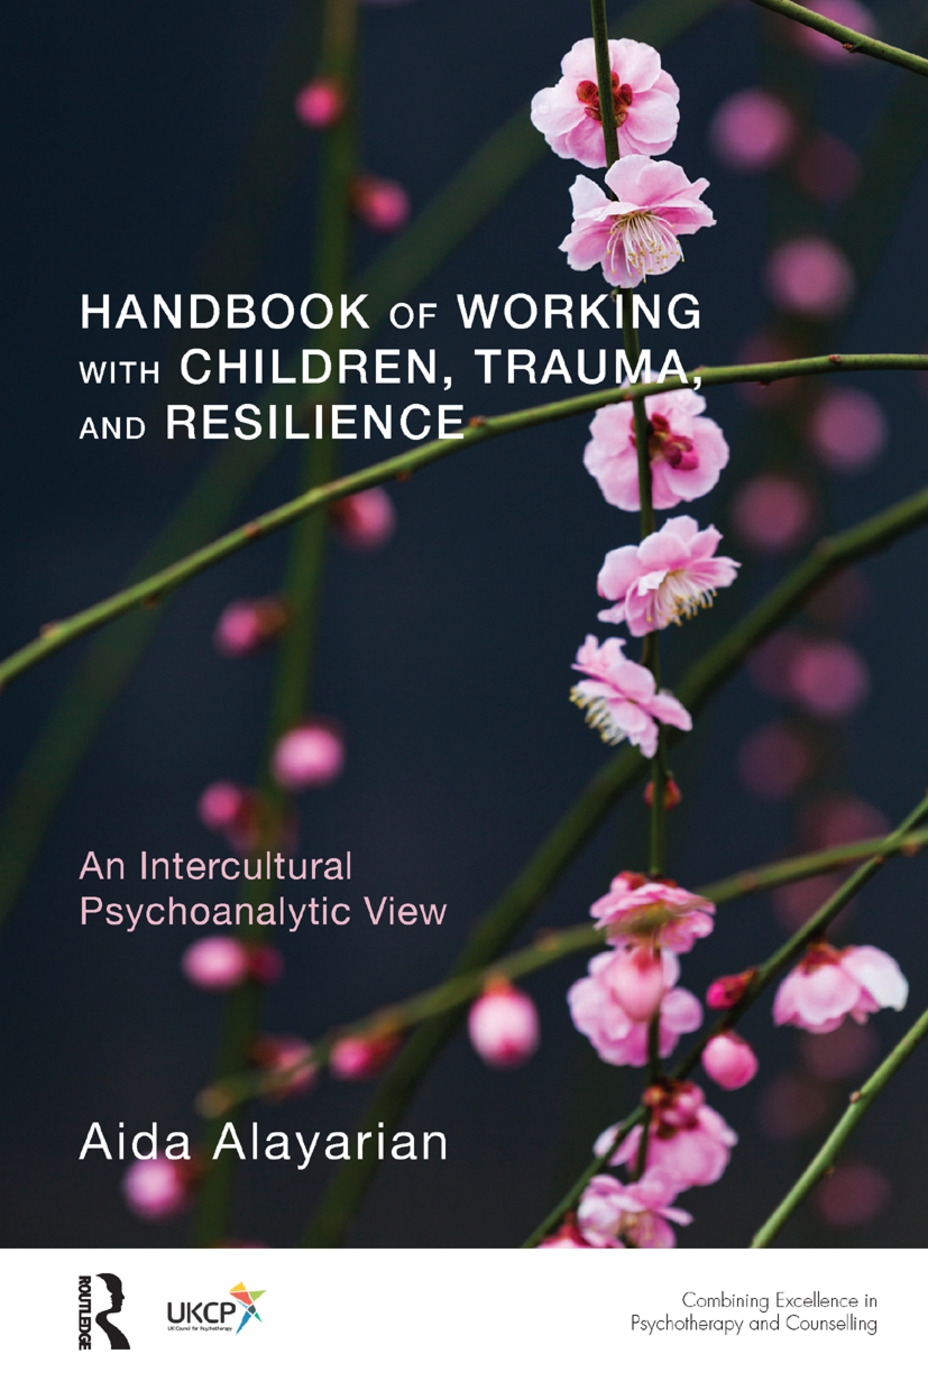 Handbook of Working With Children, Trauma, and Resilience: An Intercultural Psychoanalytic View